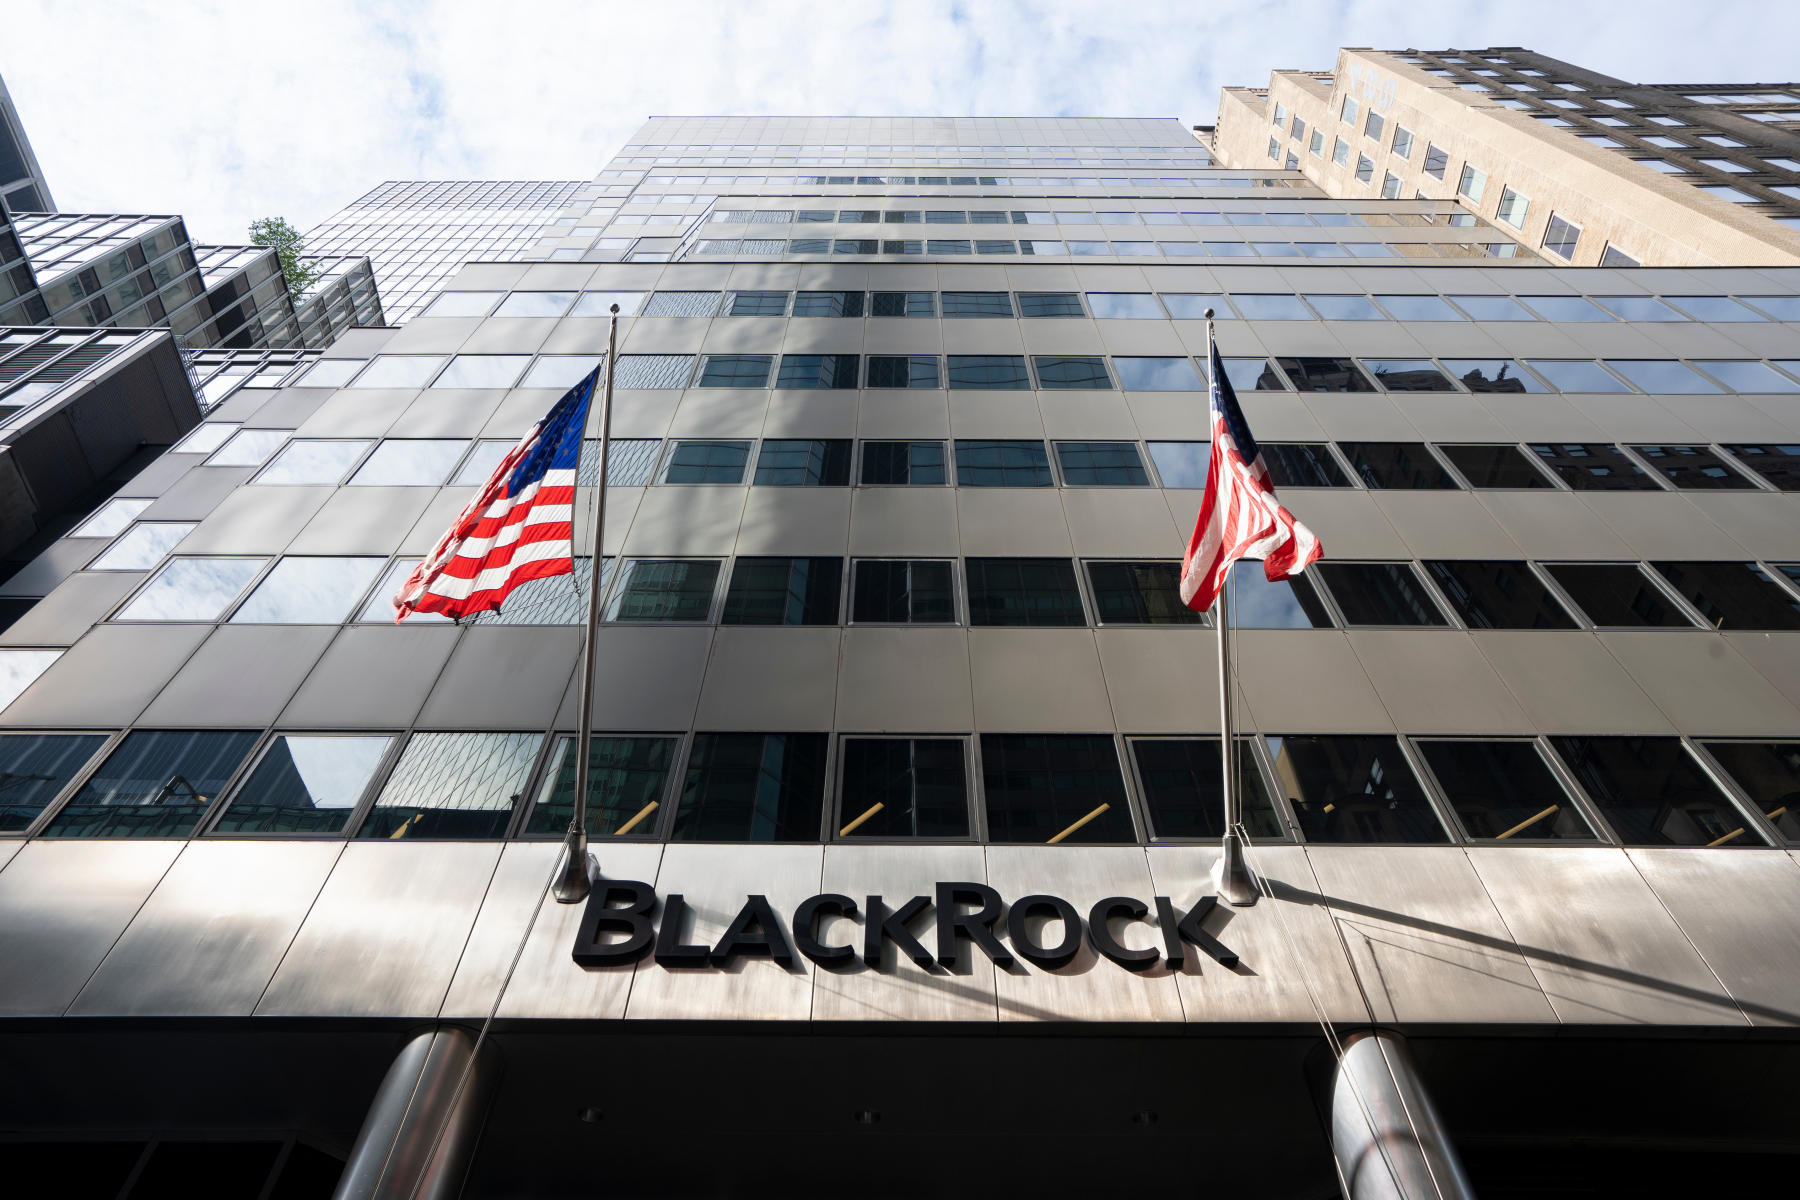 BlackRock CEO: “FTX Token Caused Trouble, But Blockchain Technology Remains Revolutionary”
